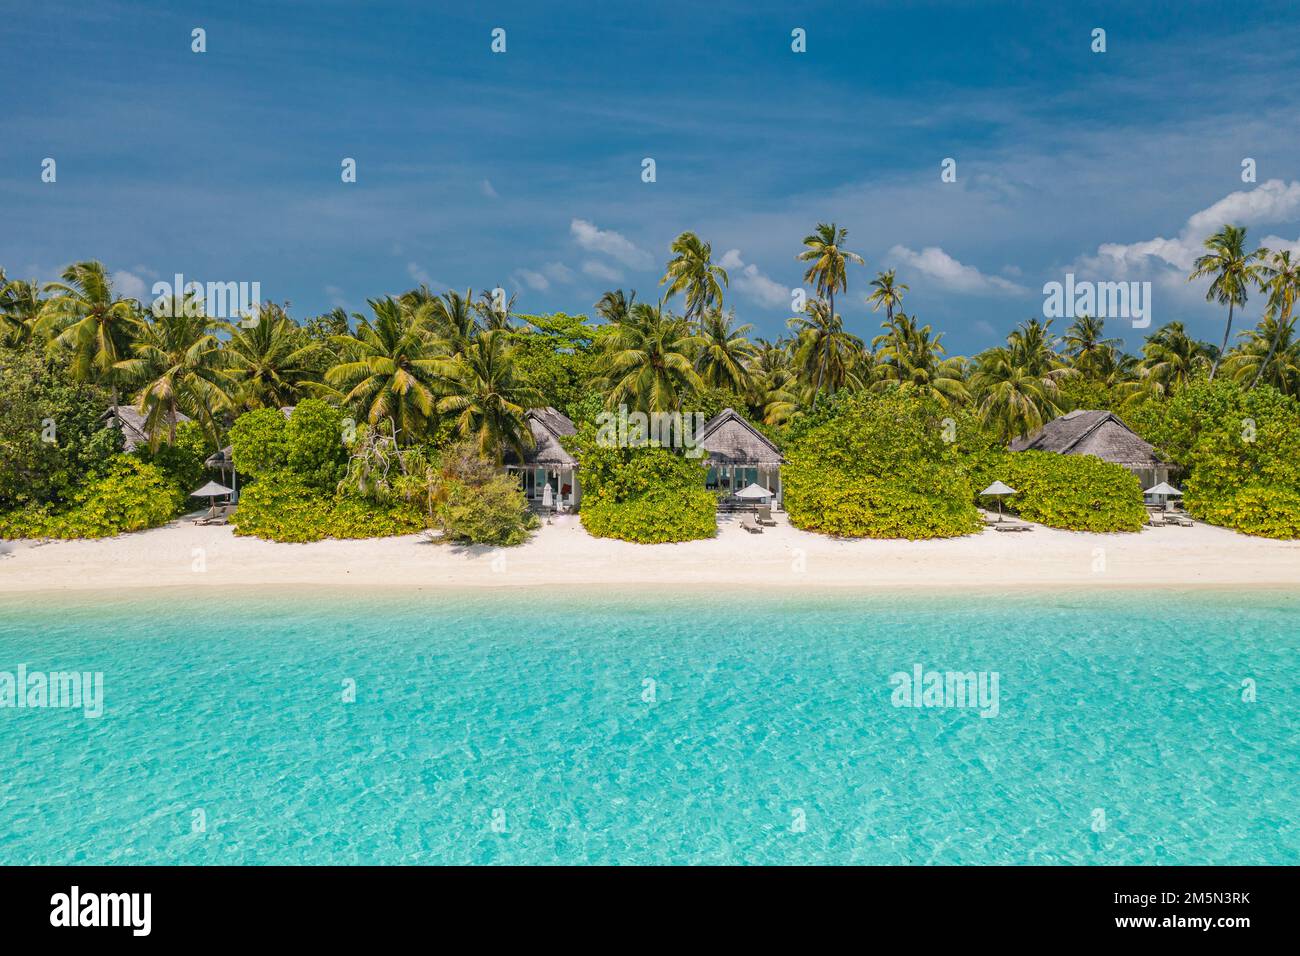 Beautiful atoll and island in Maldives from aerial view. Tranquil tropical landscape and seascape with palm trees on white sandy beach, amazing nature Stock Photo